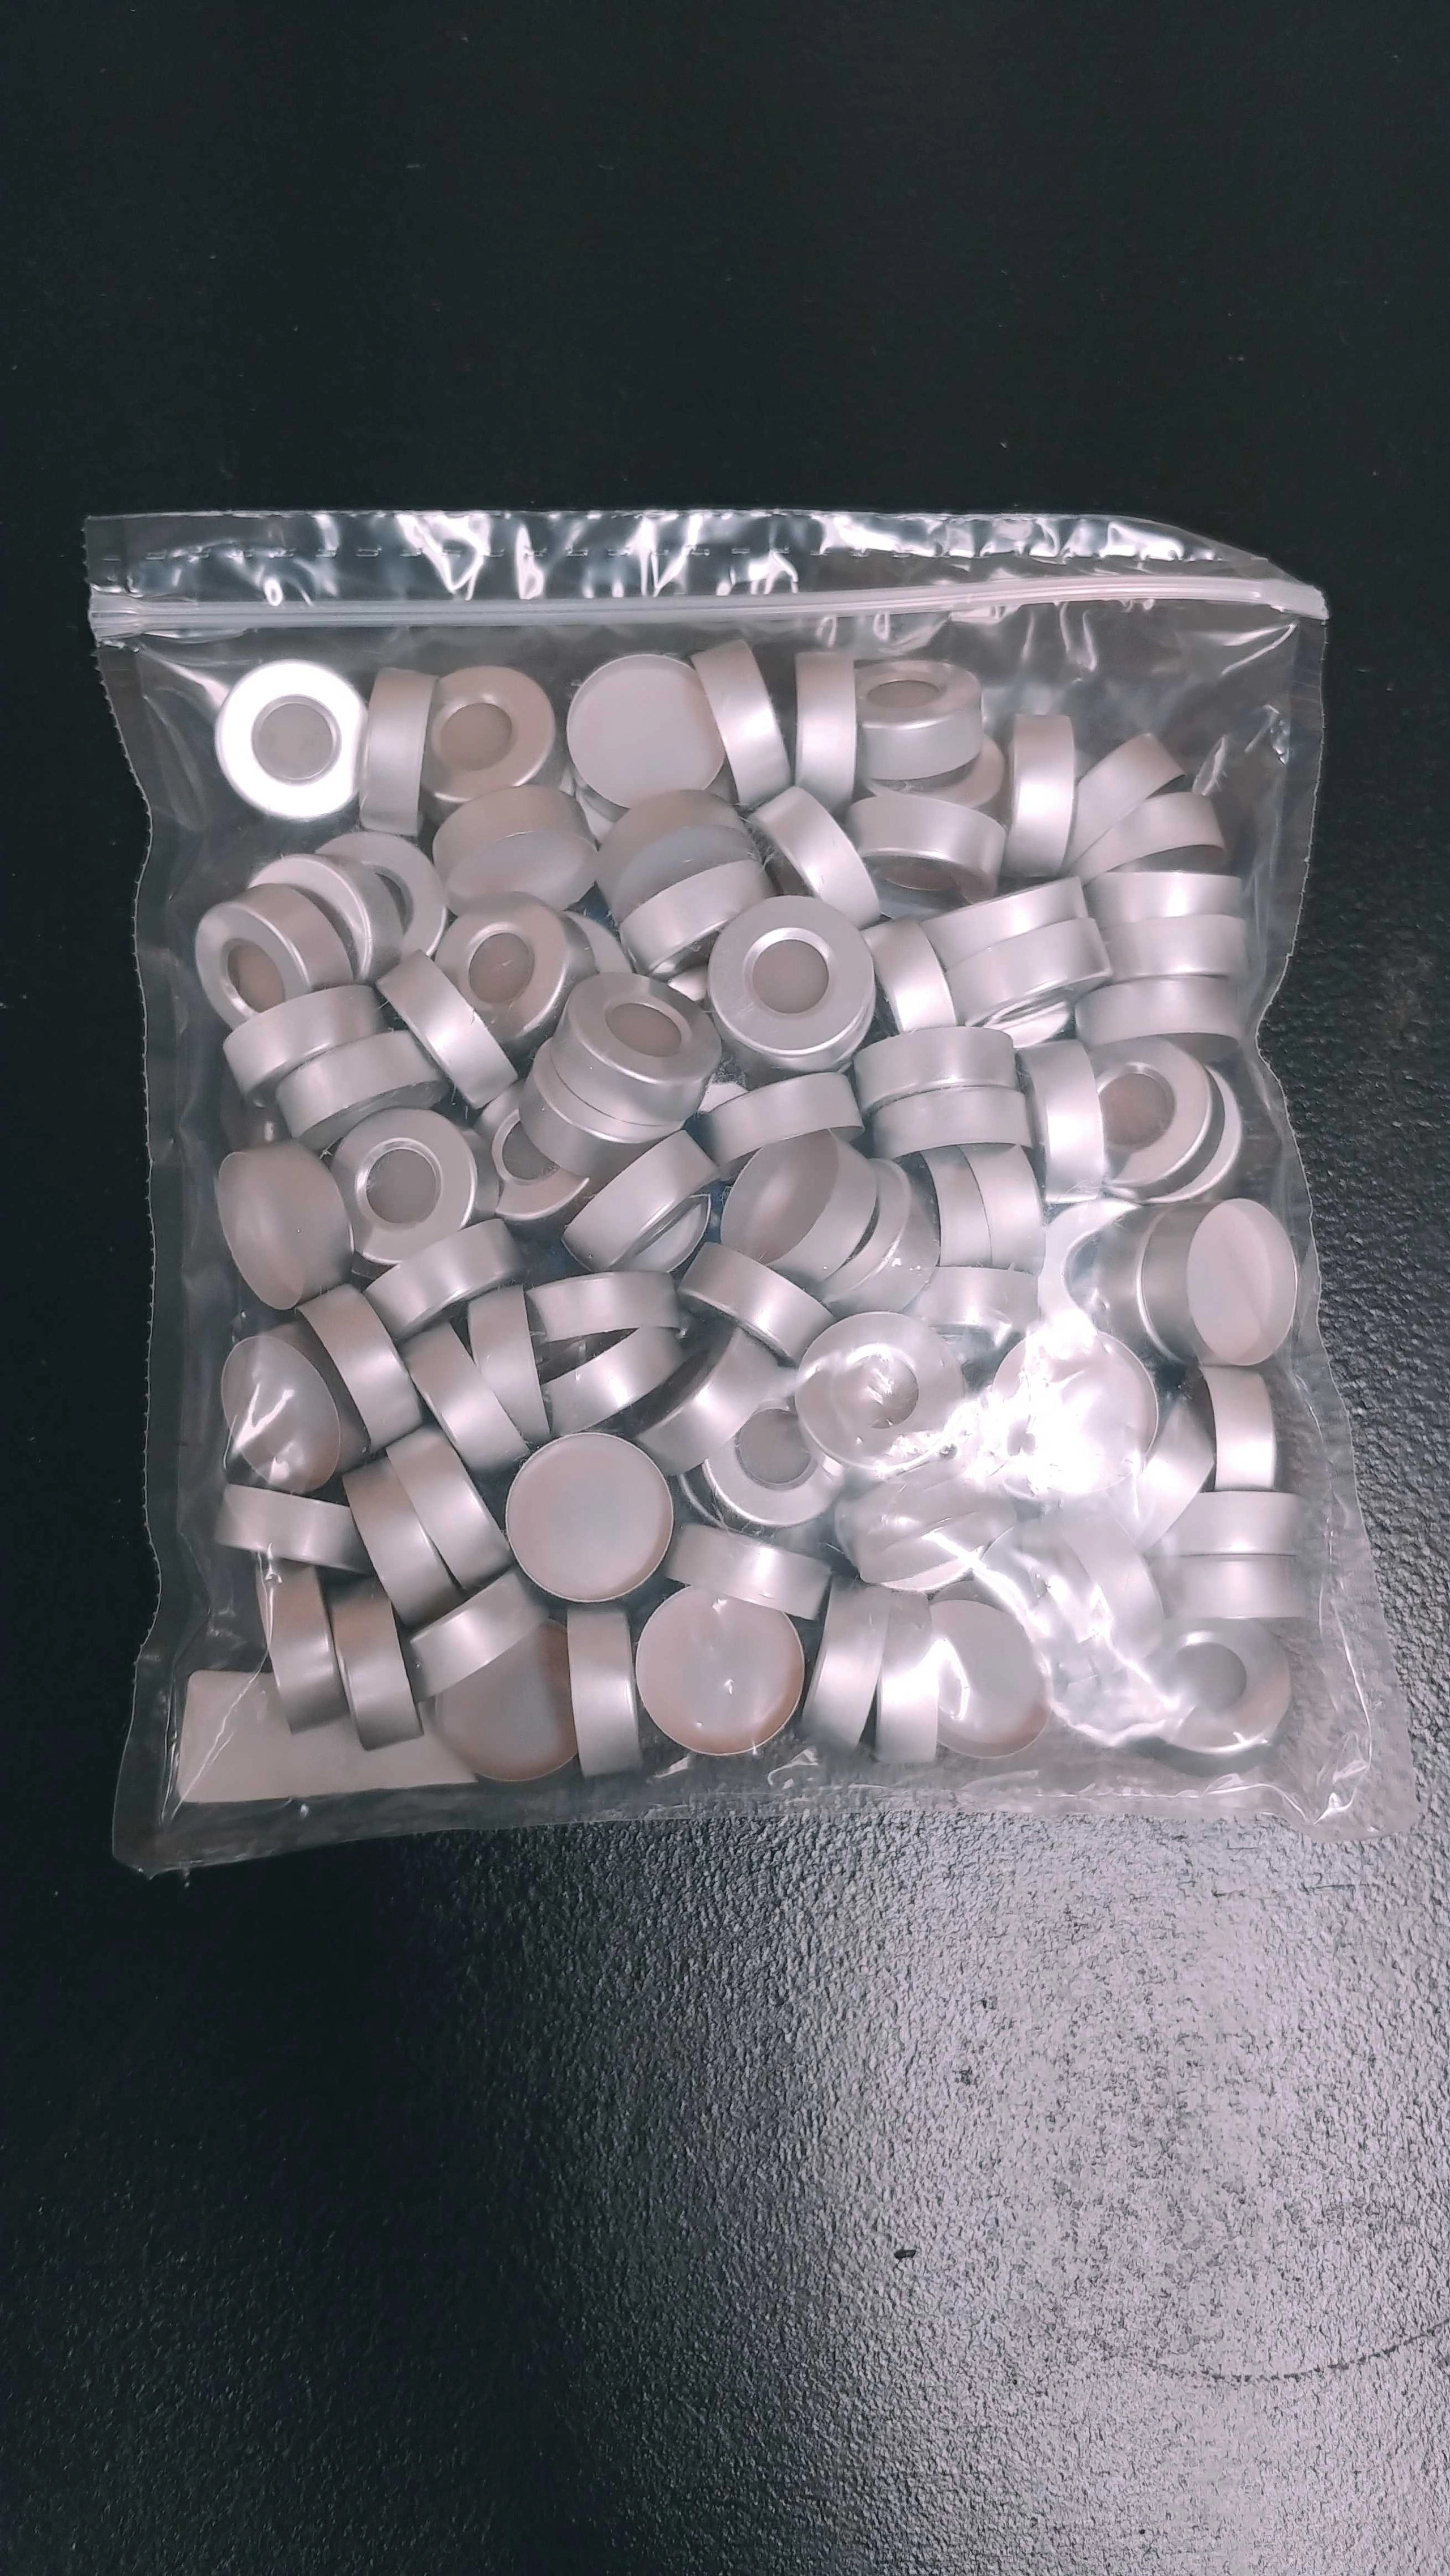 Aluminum Crimp Cap - PTFE/Clear Silicone + Aluminum Cap with Hole,  Suitable for Karl Fischer (KF) Ovens, Qty 100